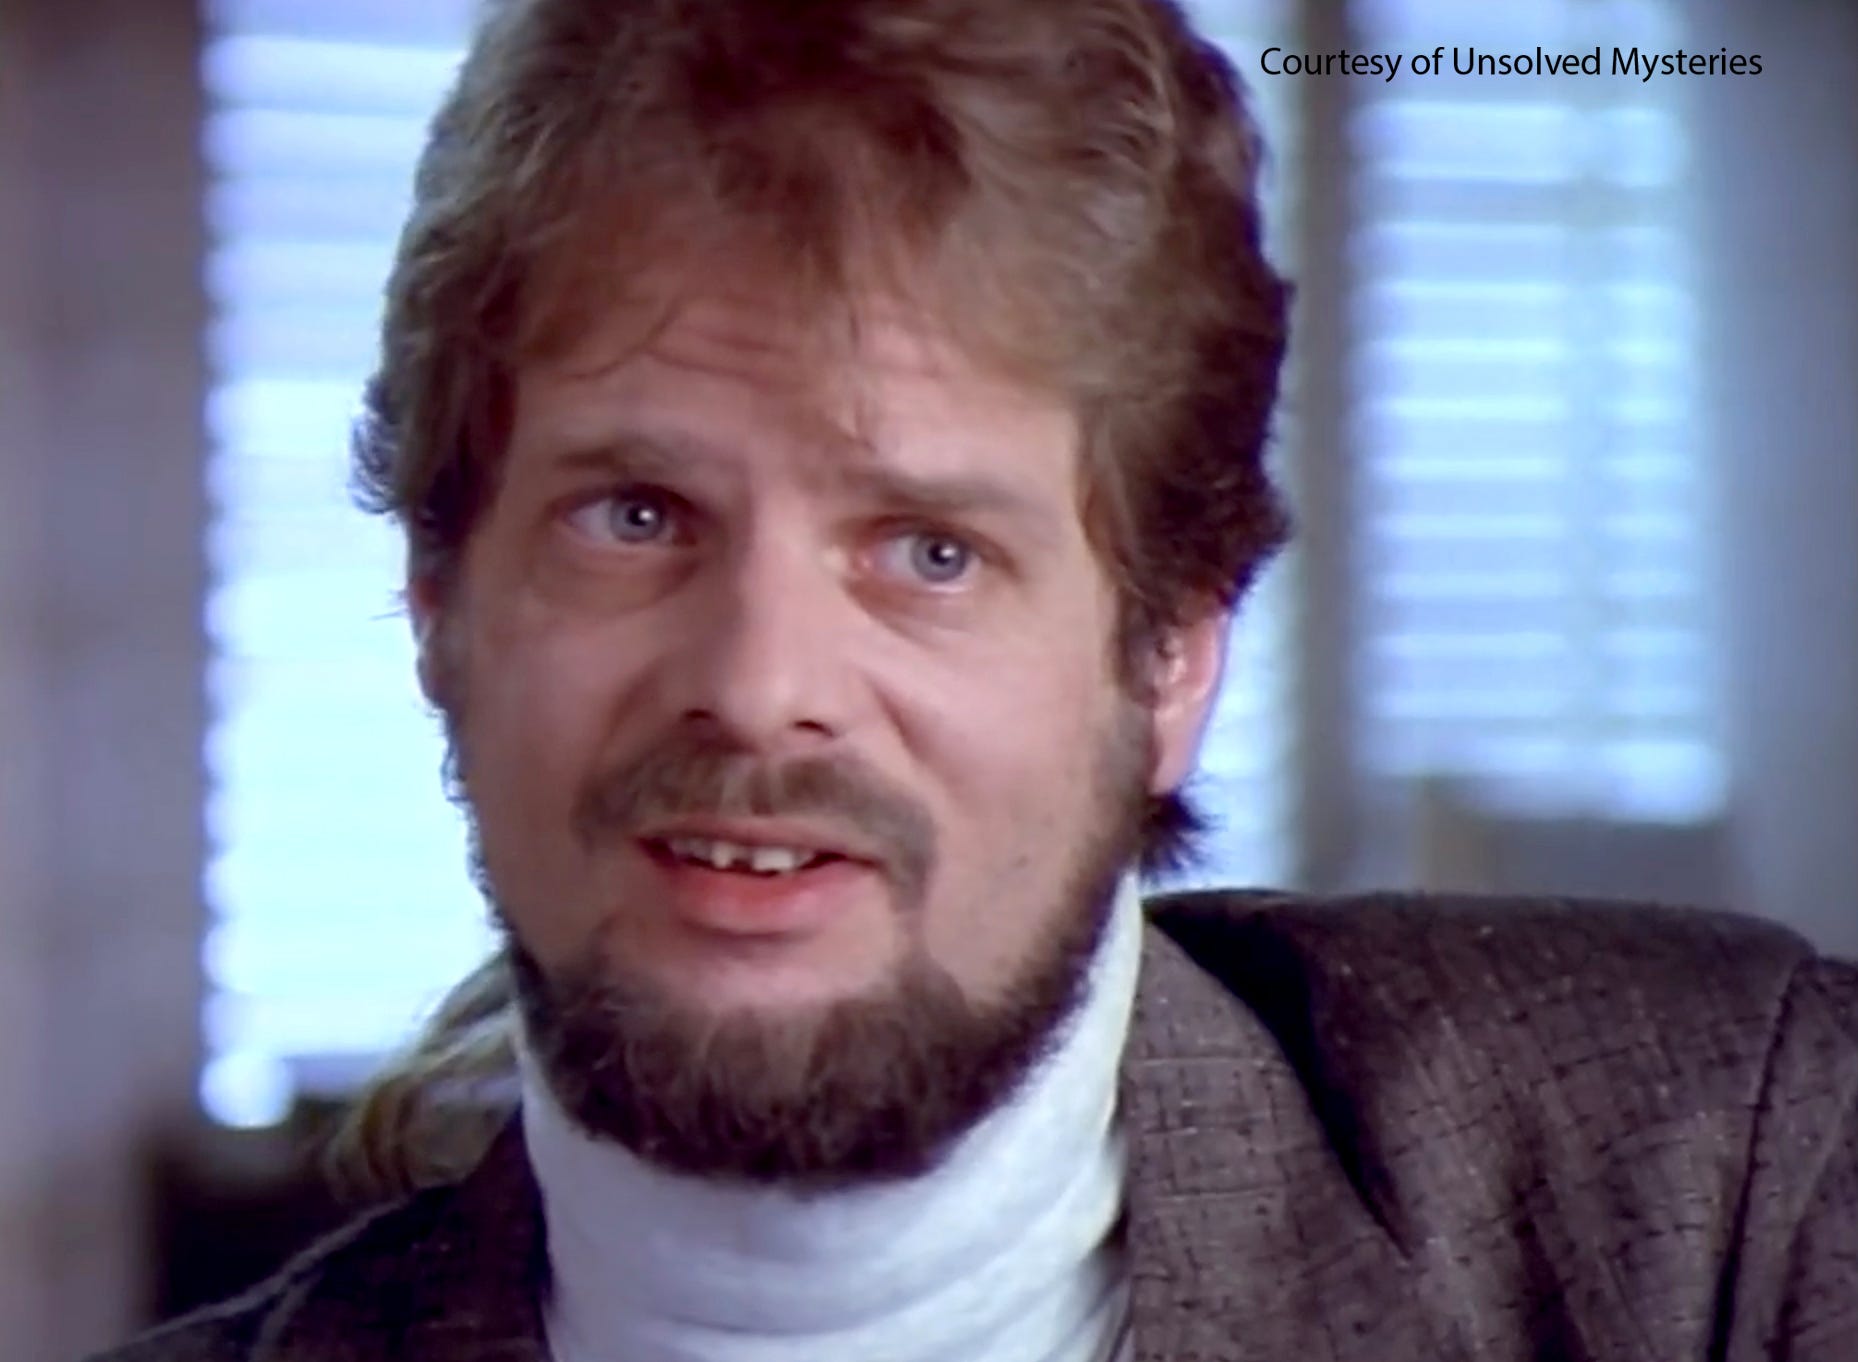 D.C. Cole was a self-described investigative reporter who wrote for a now-defunct weekly called Everybody's News. Cole also wrote a book about the David Bocks case and lobbied to get it on Unsolved Mysteries. This is a screen grab from an Unsolved Mysteries episode where he was interviewed.